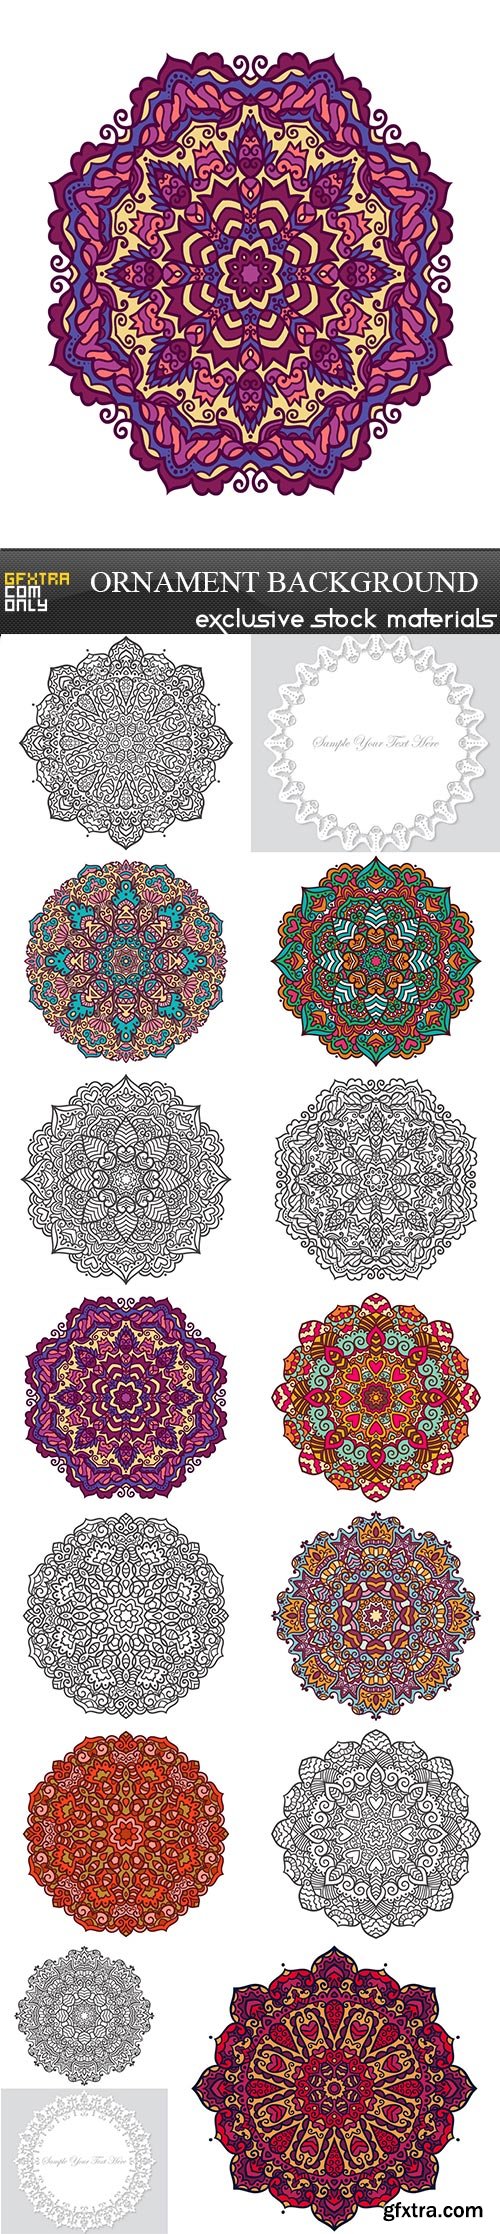 Ornament background, 15 x EPS